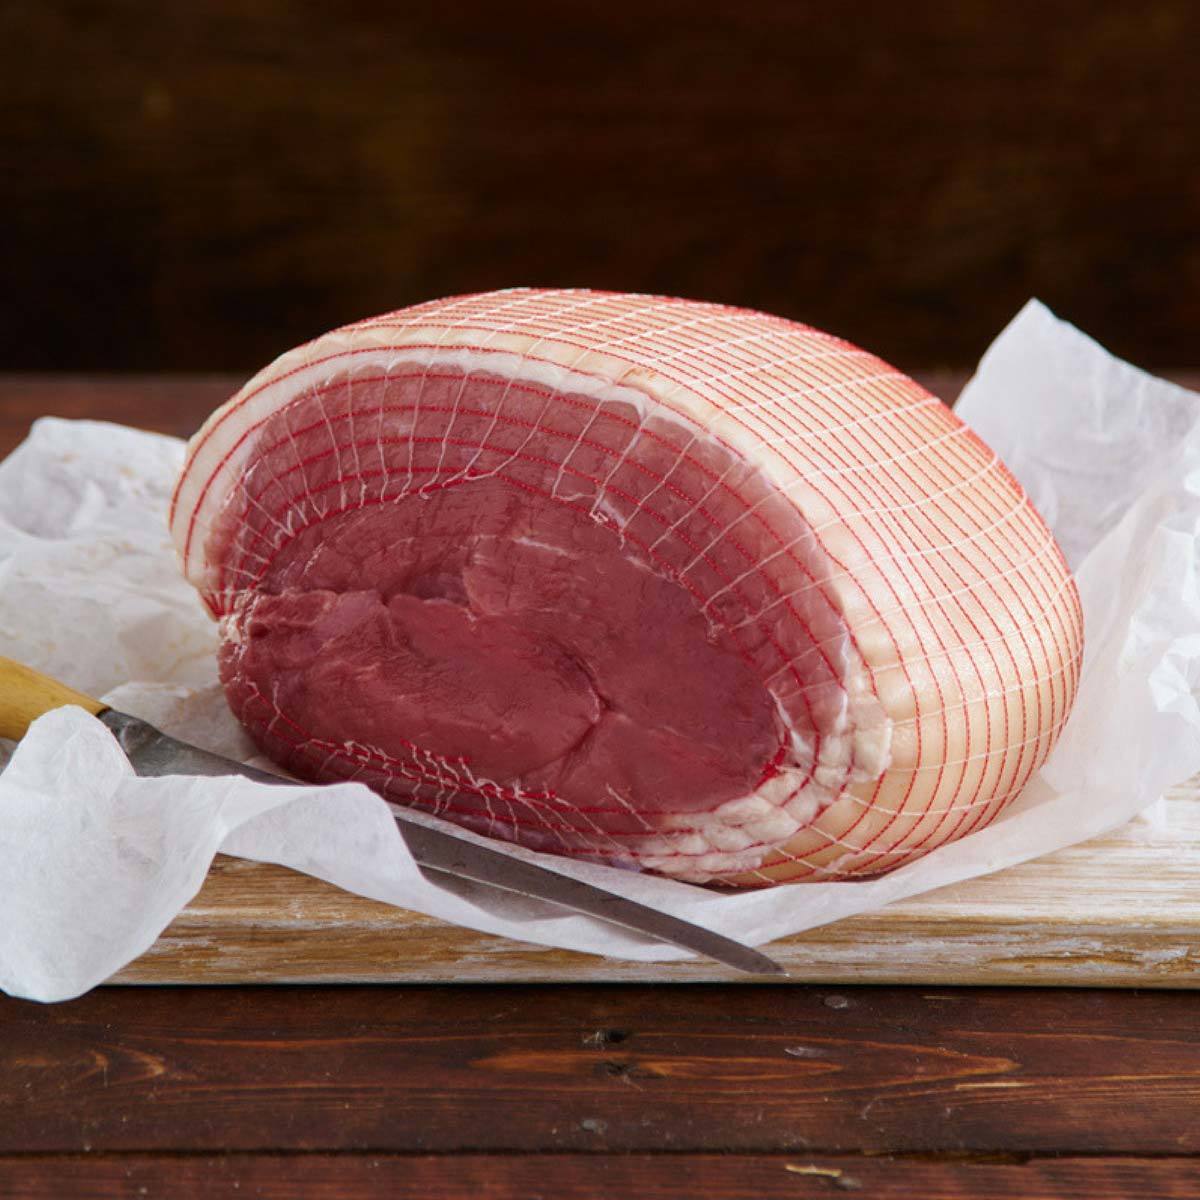 Bearfield's of London 6 Prime Gammon Joints, 10kg Minimum Weight